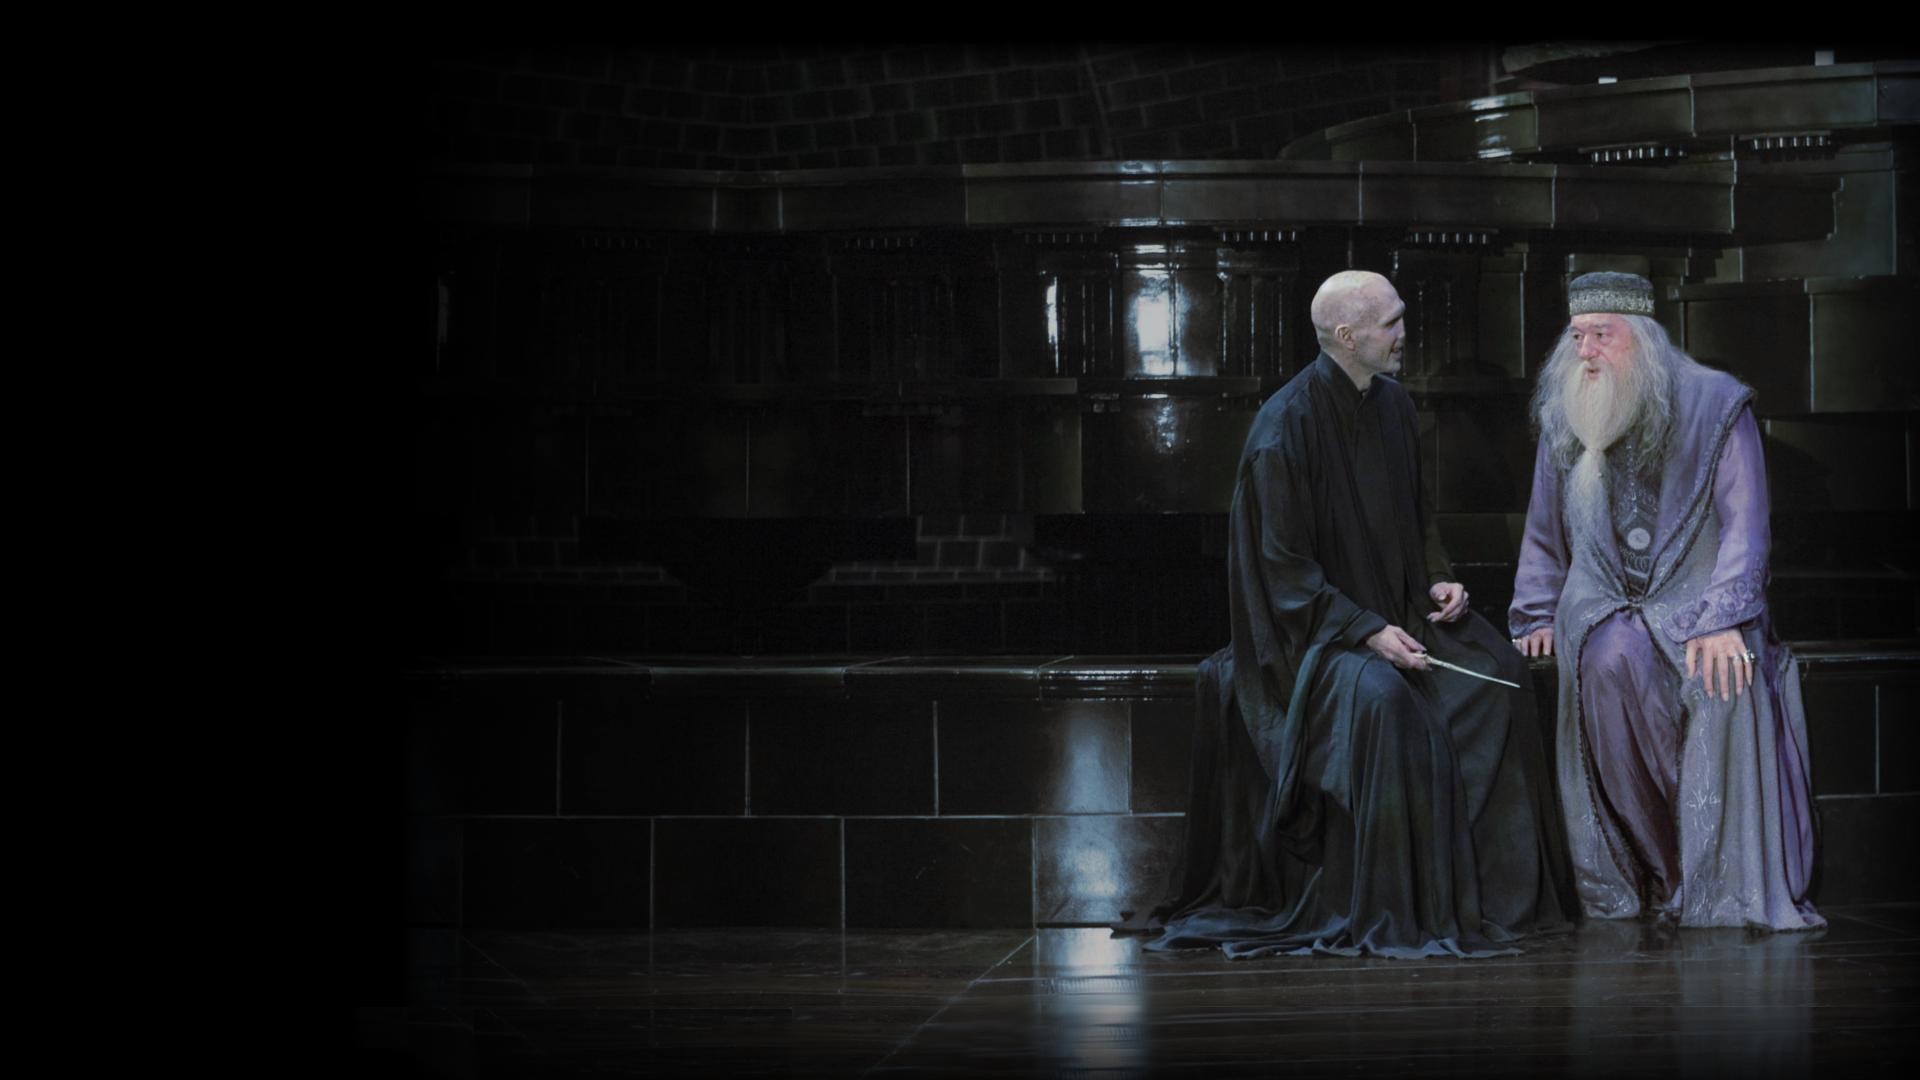 1920x1080 MediaDumbledore and Voldemort having a nice chat - Wallpaper ...